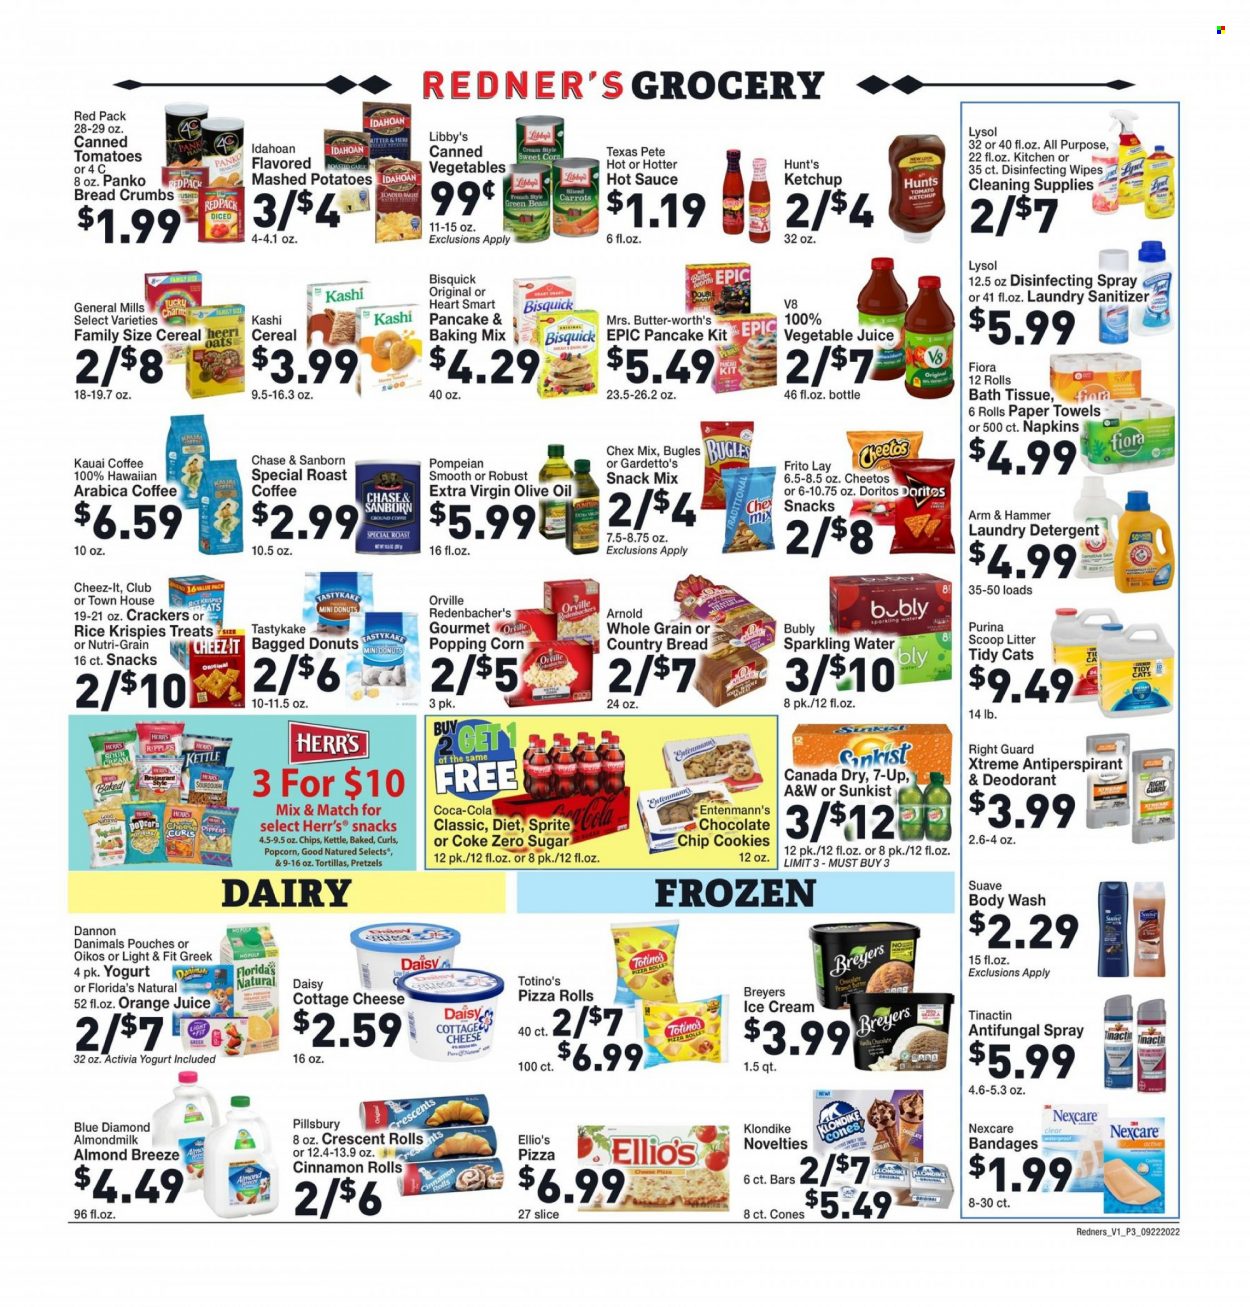 thumbnail - Redner's Markets Flyer - 09/22/2022 - 09/28/2022 - Sales products - tortillas, pretzels, pizza rolls, cinnamon roll, crescent rolls, donut, Entenmann's, breadcrumbs, panko breadcrumbs, carrots, corn, green beans, sweet corn, mashed potatoes, pizza, sauce, pancakes, Pillsbury, Spam, cottage cheese, yoghurt, Activia, Oikos, Dannon, Danimals, almond milk, Almond Breeze, ice cream, cookies, snack, crackers, Florida's Natural, Doritos, Cheetos, popcorn, Cheez-It, Chex Mix, ARM & HAMMER, Bisquick, oats, baking mix, canned vegetables, cereals, Rice Krispies, Nutri-Grain, hot sauce, ketchup, extra virgin olive oil, olive oil, oil, peanut butter, Blue Diamond, Canada Dry, Coca-Cola, Sprite, orange juice, juice, Coca-Cola zero, 7UP, A&W, vegetable juice, sparkling water, coffee, wipes, napkins, bath tissue, kitchen towels, paper towels, antifungal spray, detergent, Lysol, laundry detergent, body wash, Suave. Page 5.